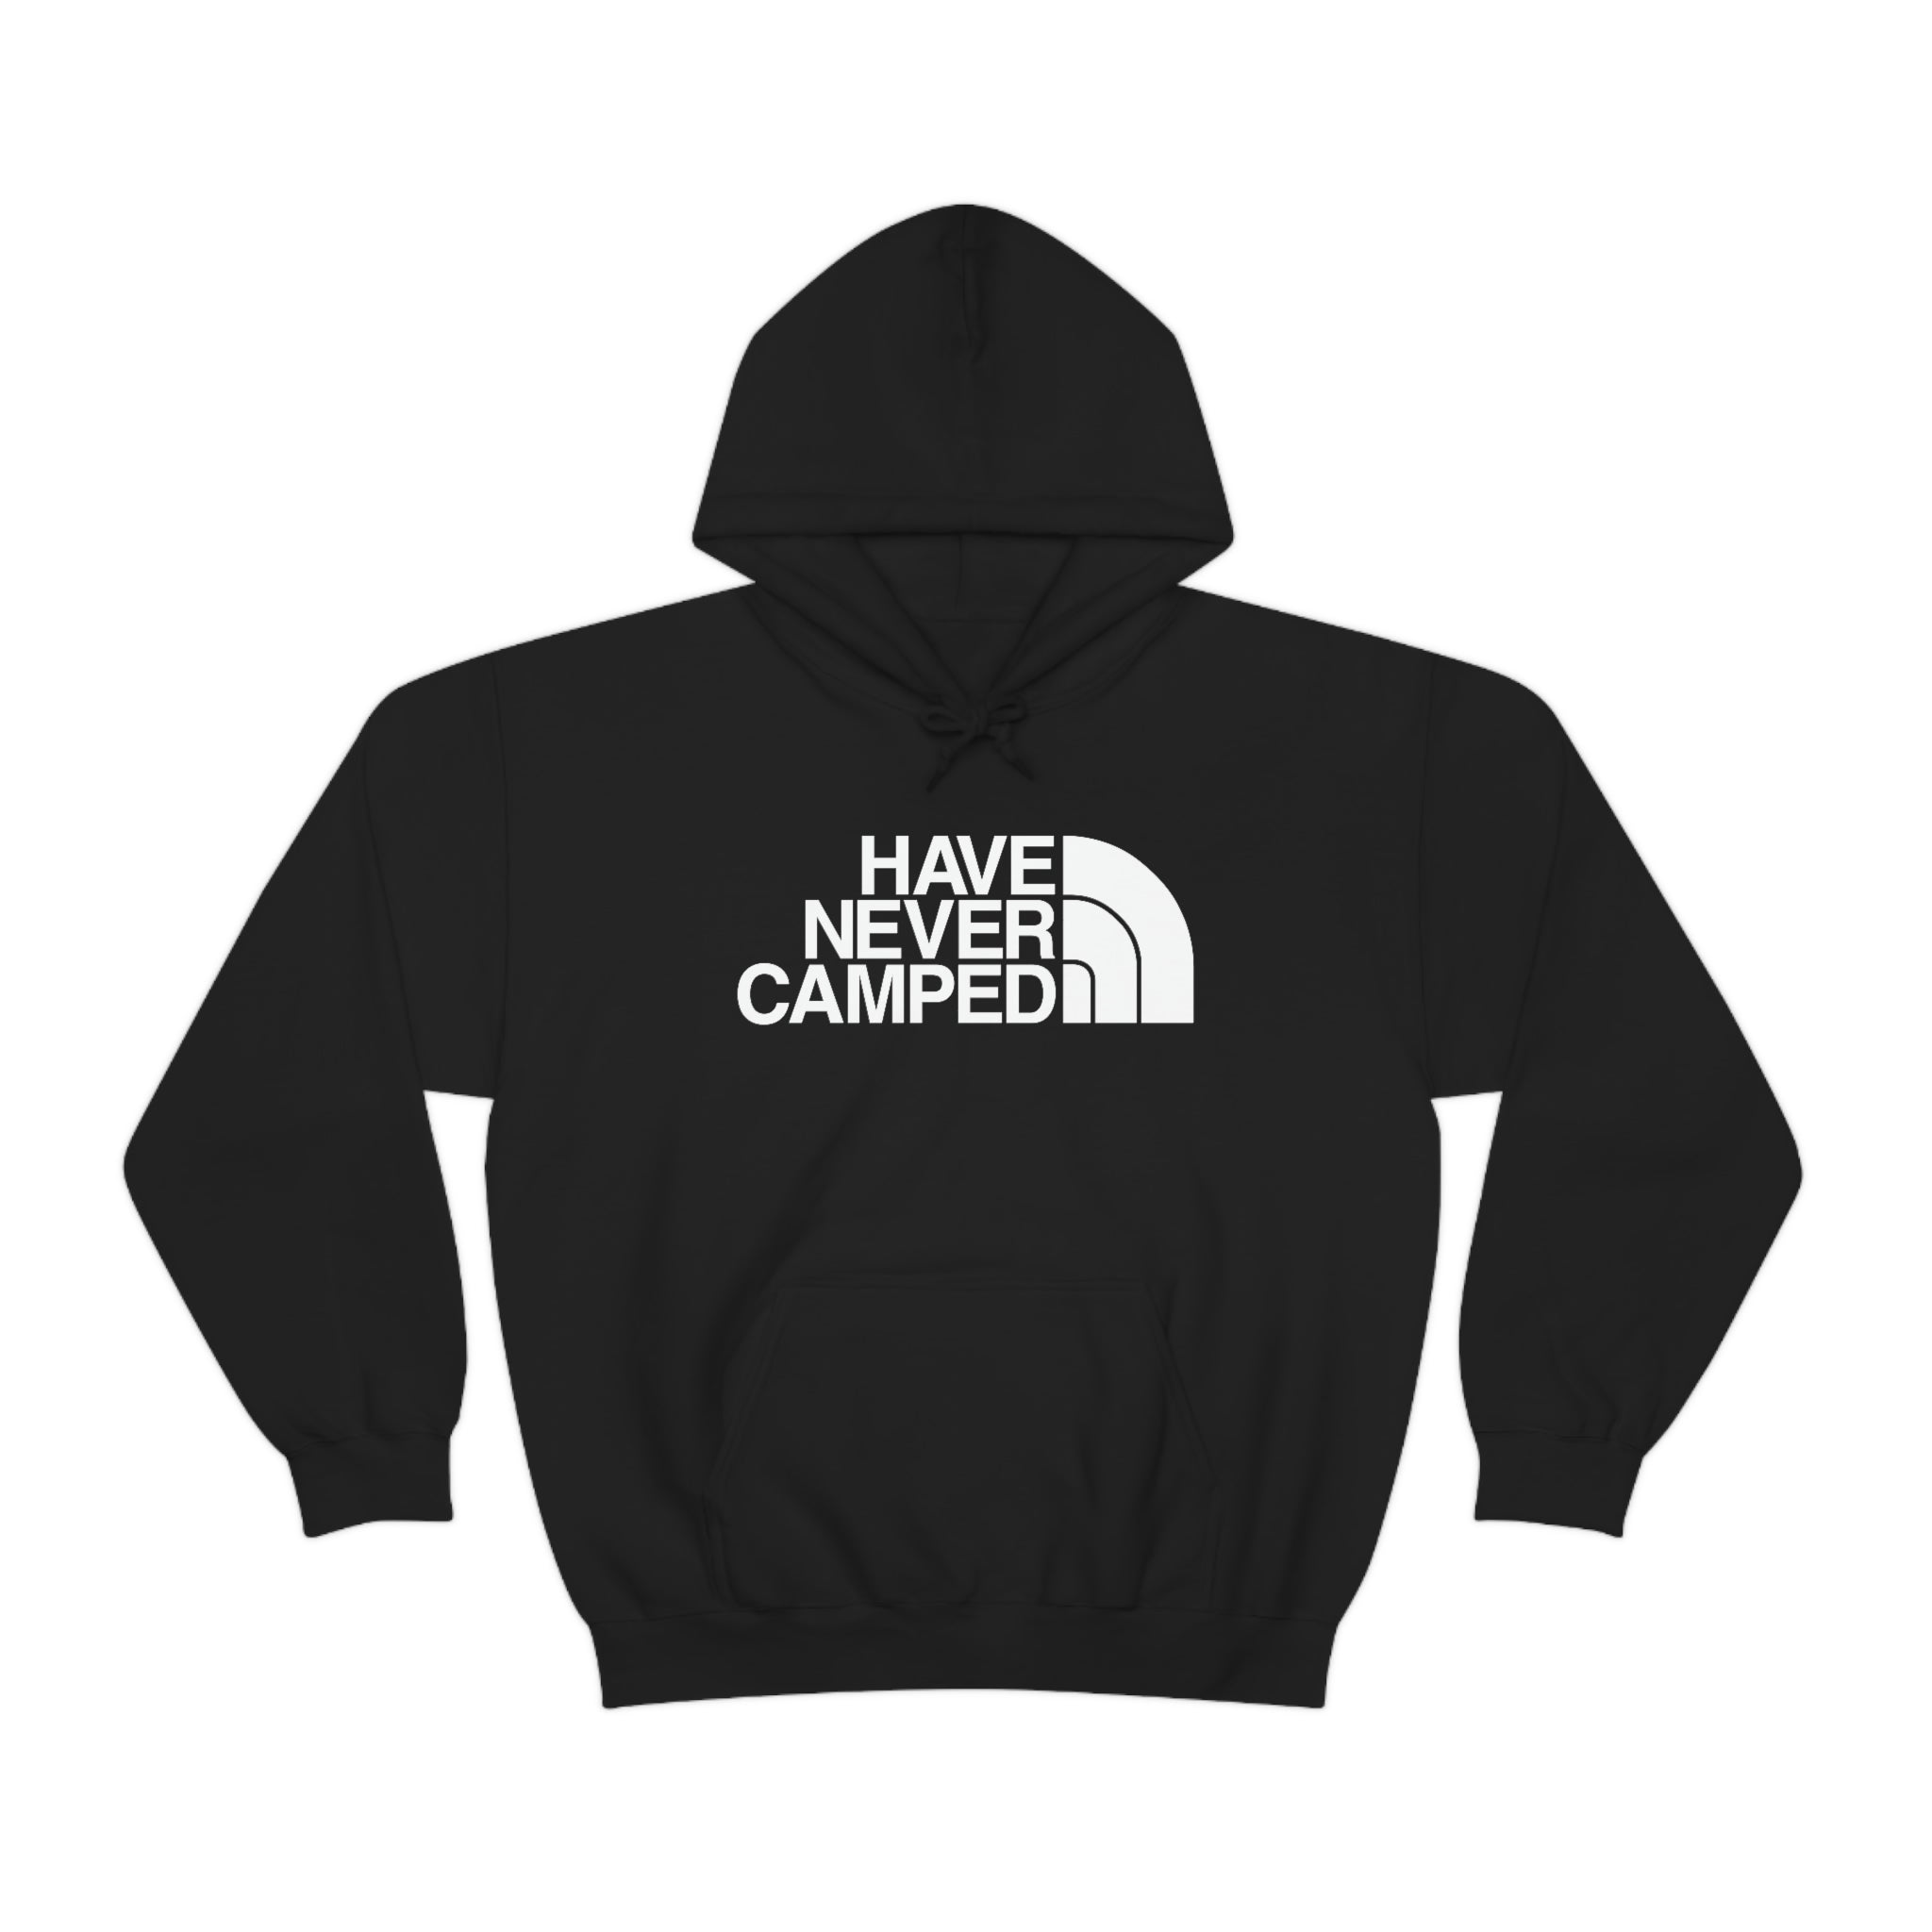 "Have Never Camped" Hooded Sweatshirt